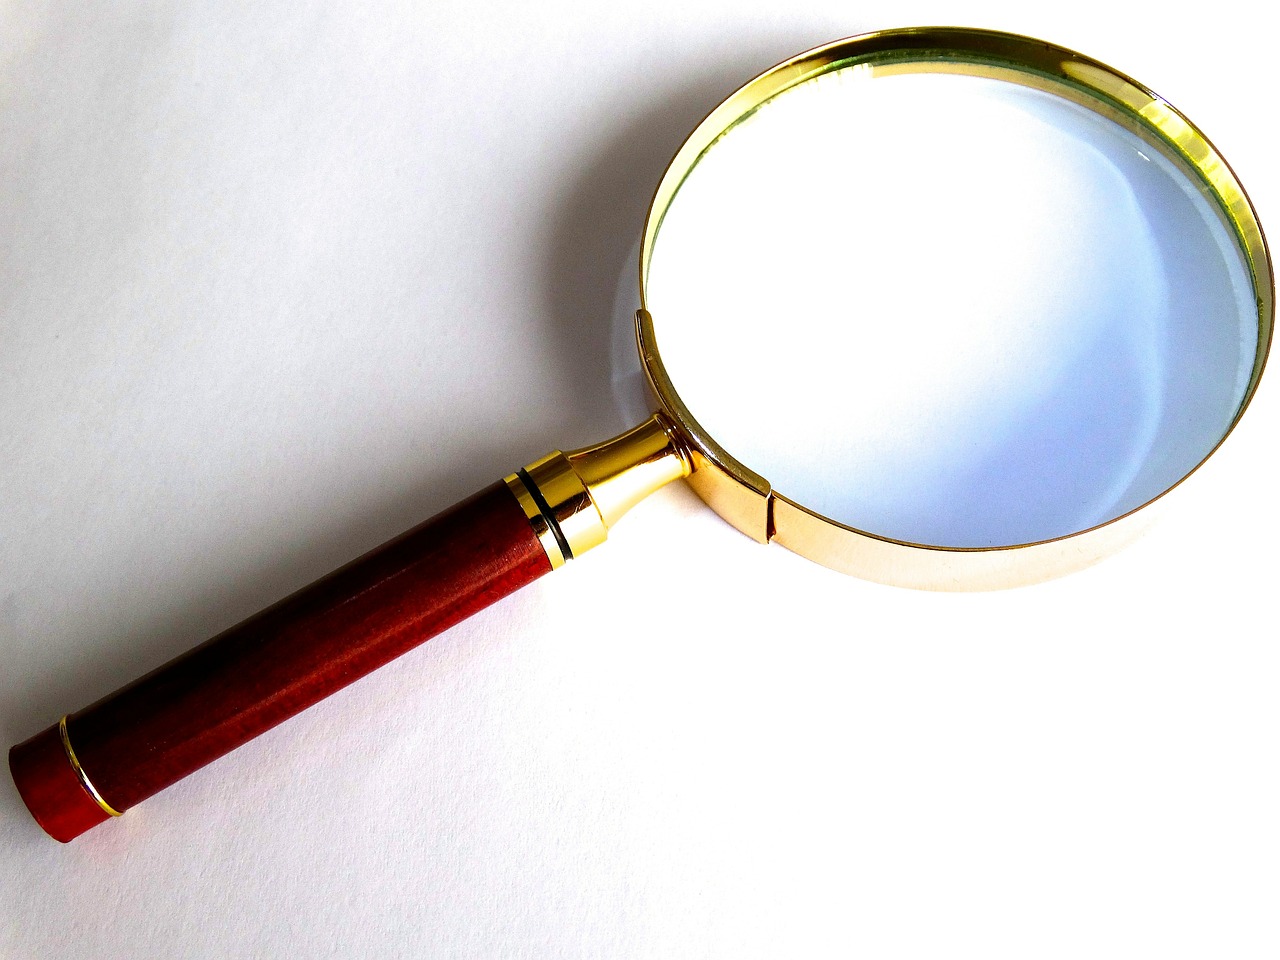 magnifying glass magnification larger view free photo